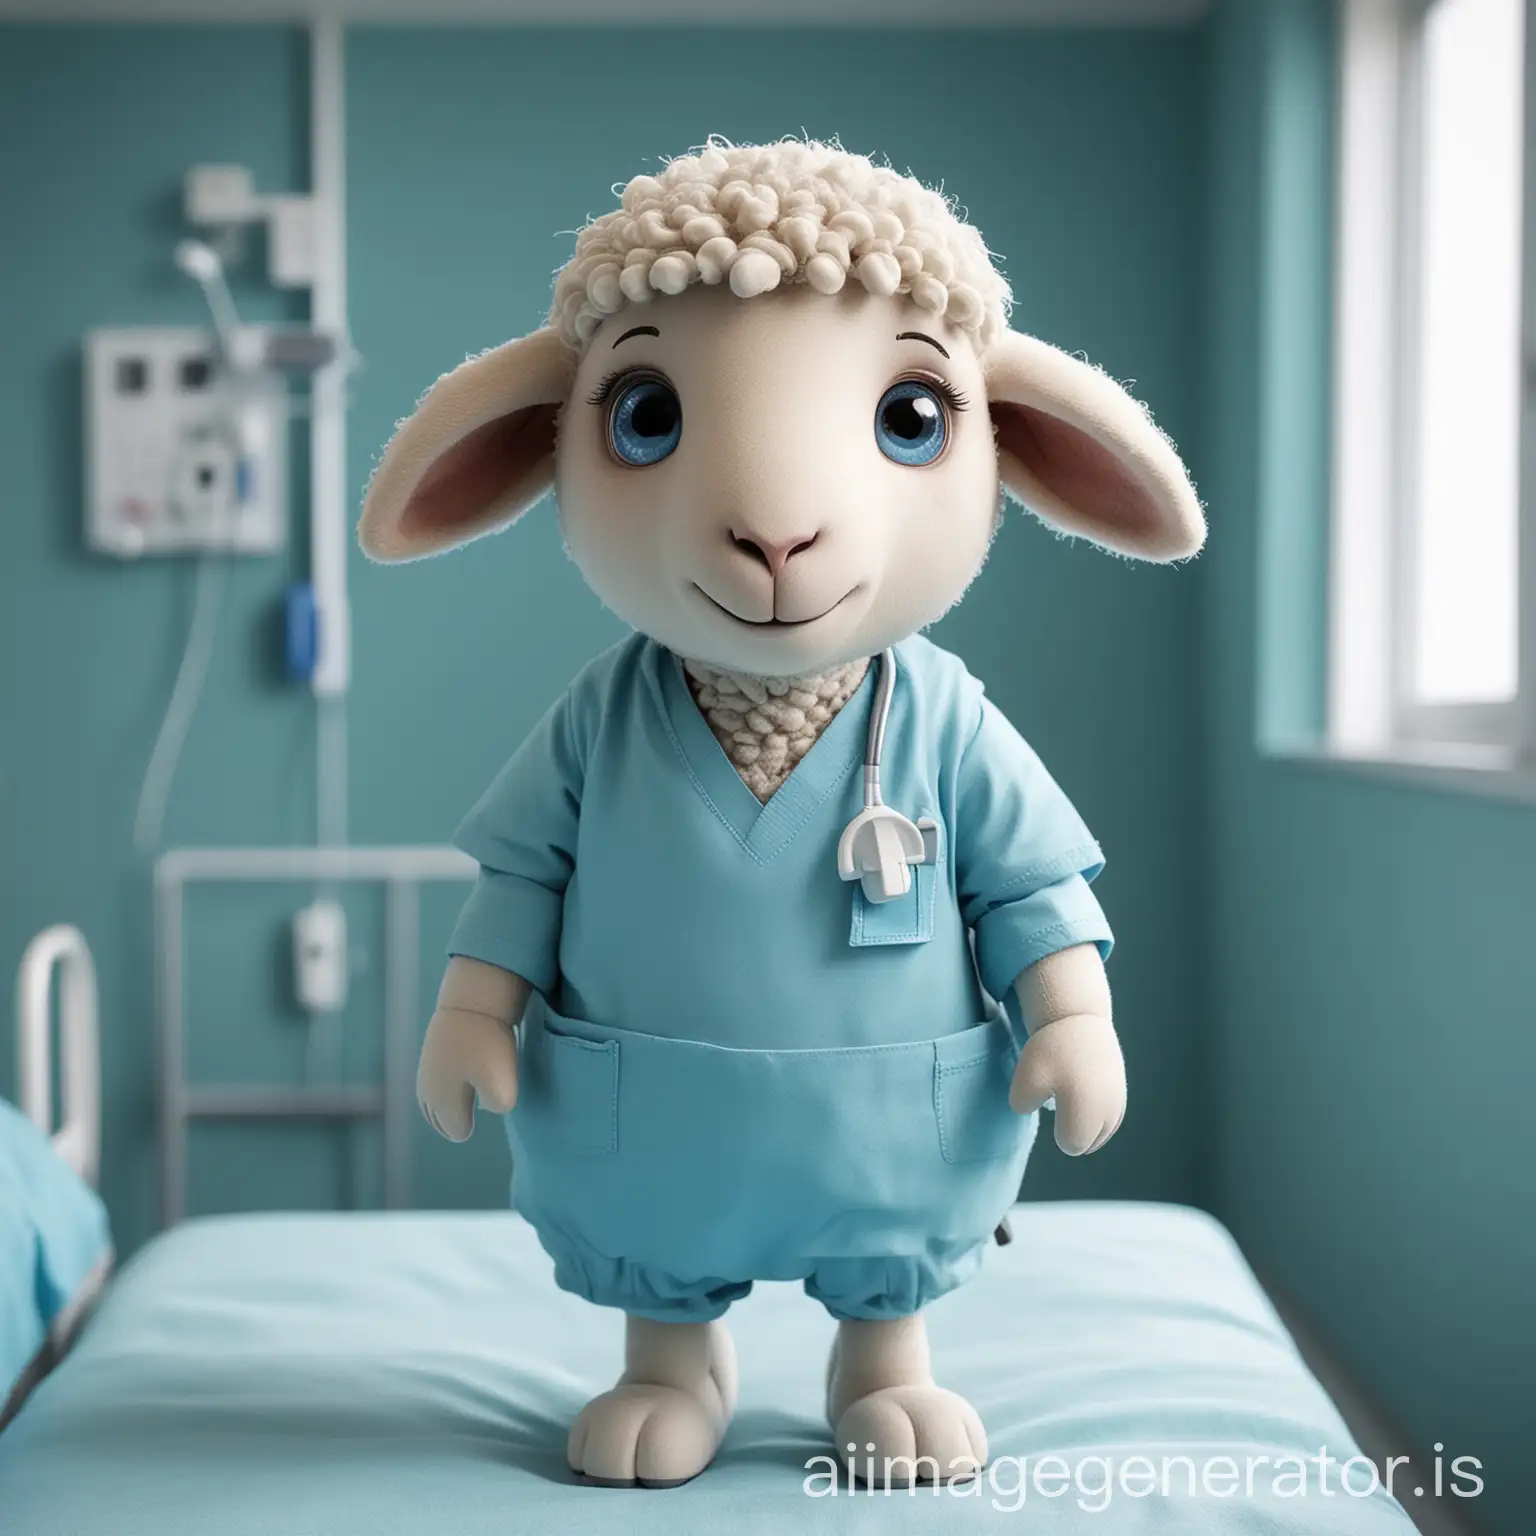 A sheep character human with background color blue in hospital